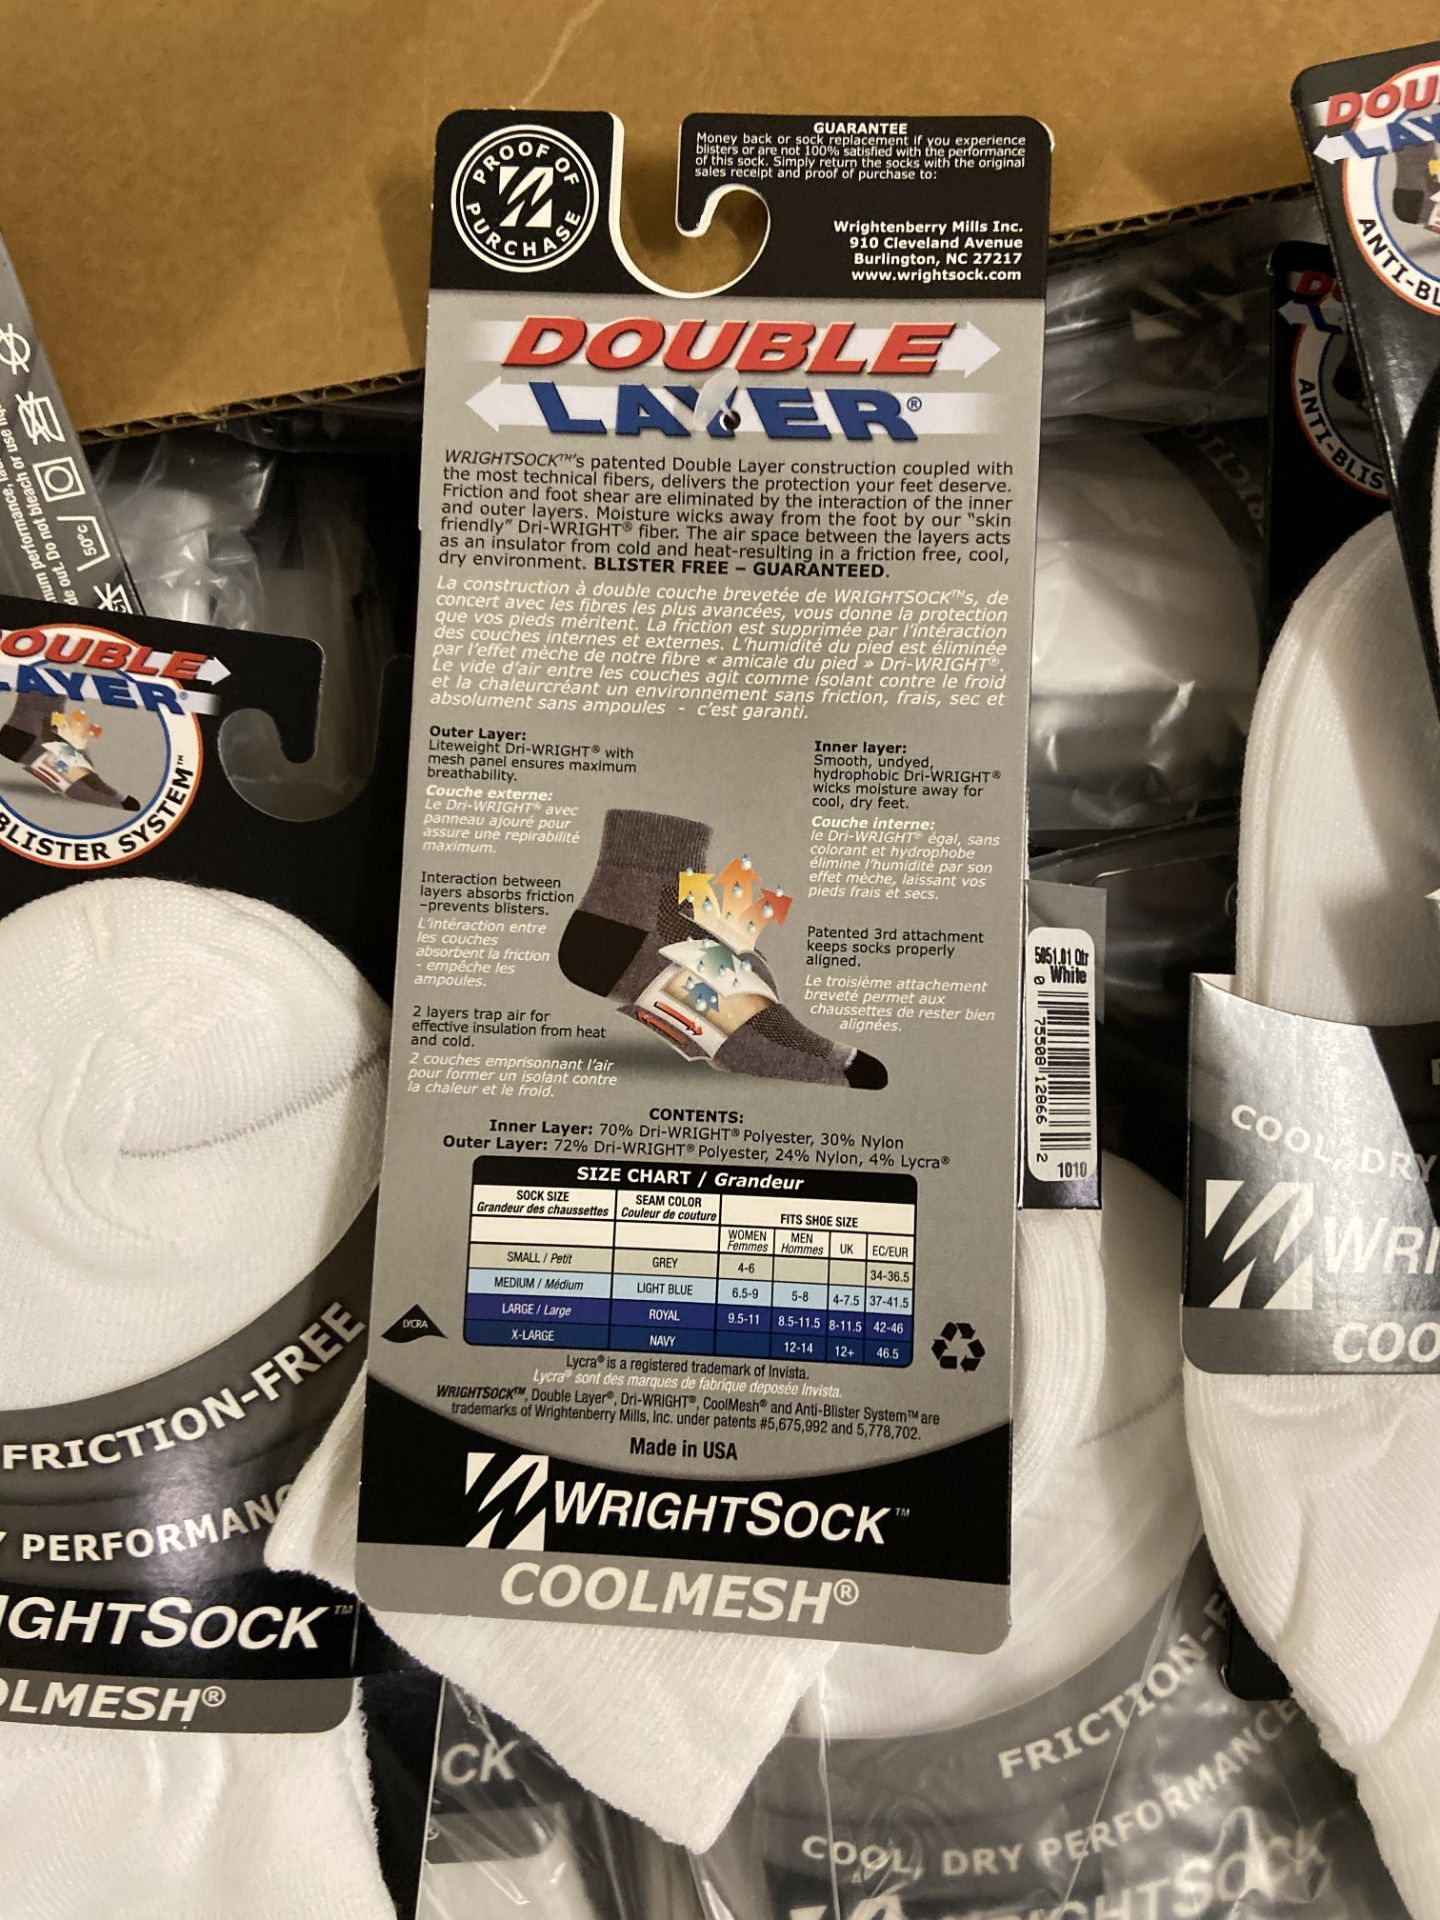 250+ packs of New Socks, Wrightsock Coolmesh, Double Layer, White Each lot has approx 250 packs, - Image 3 of 3